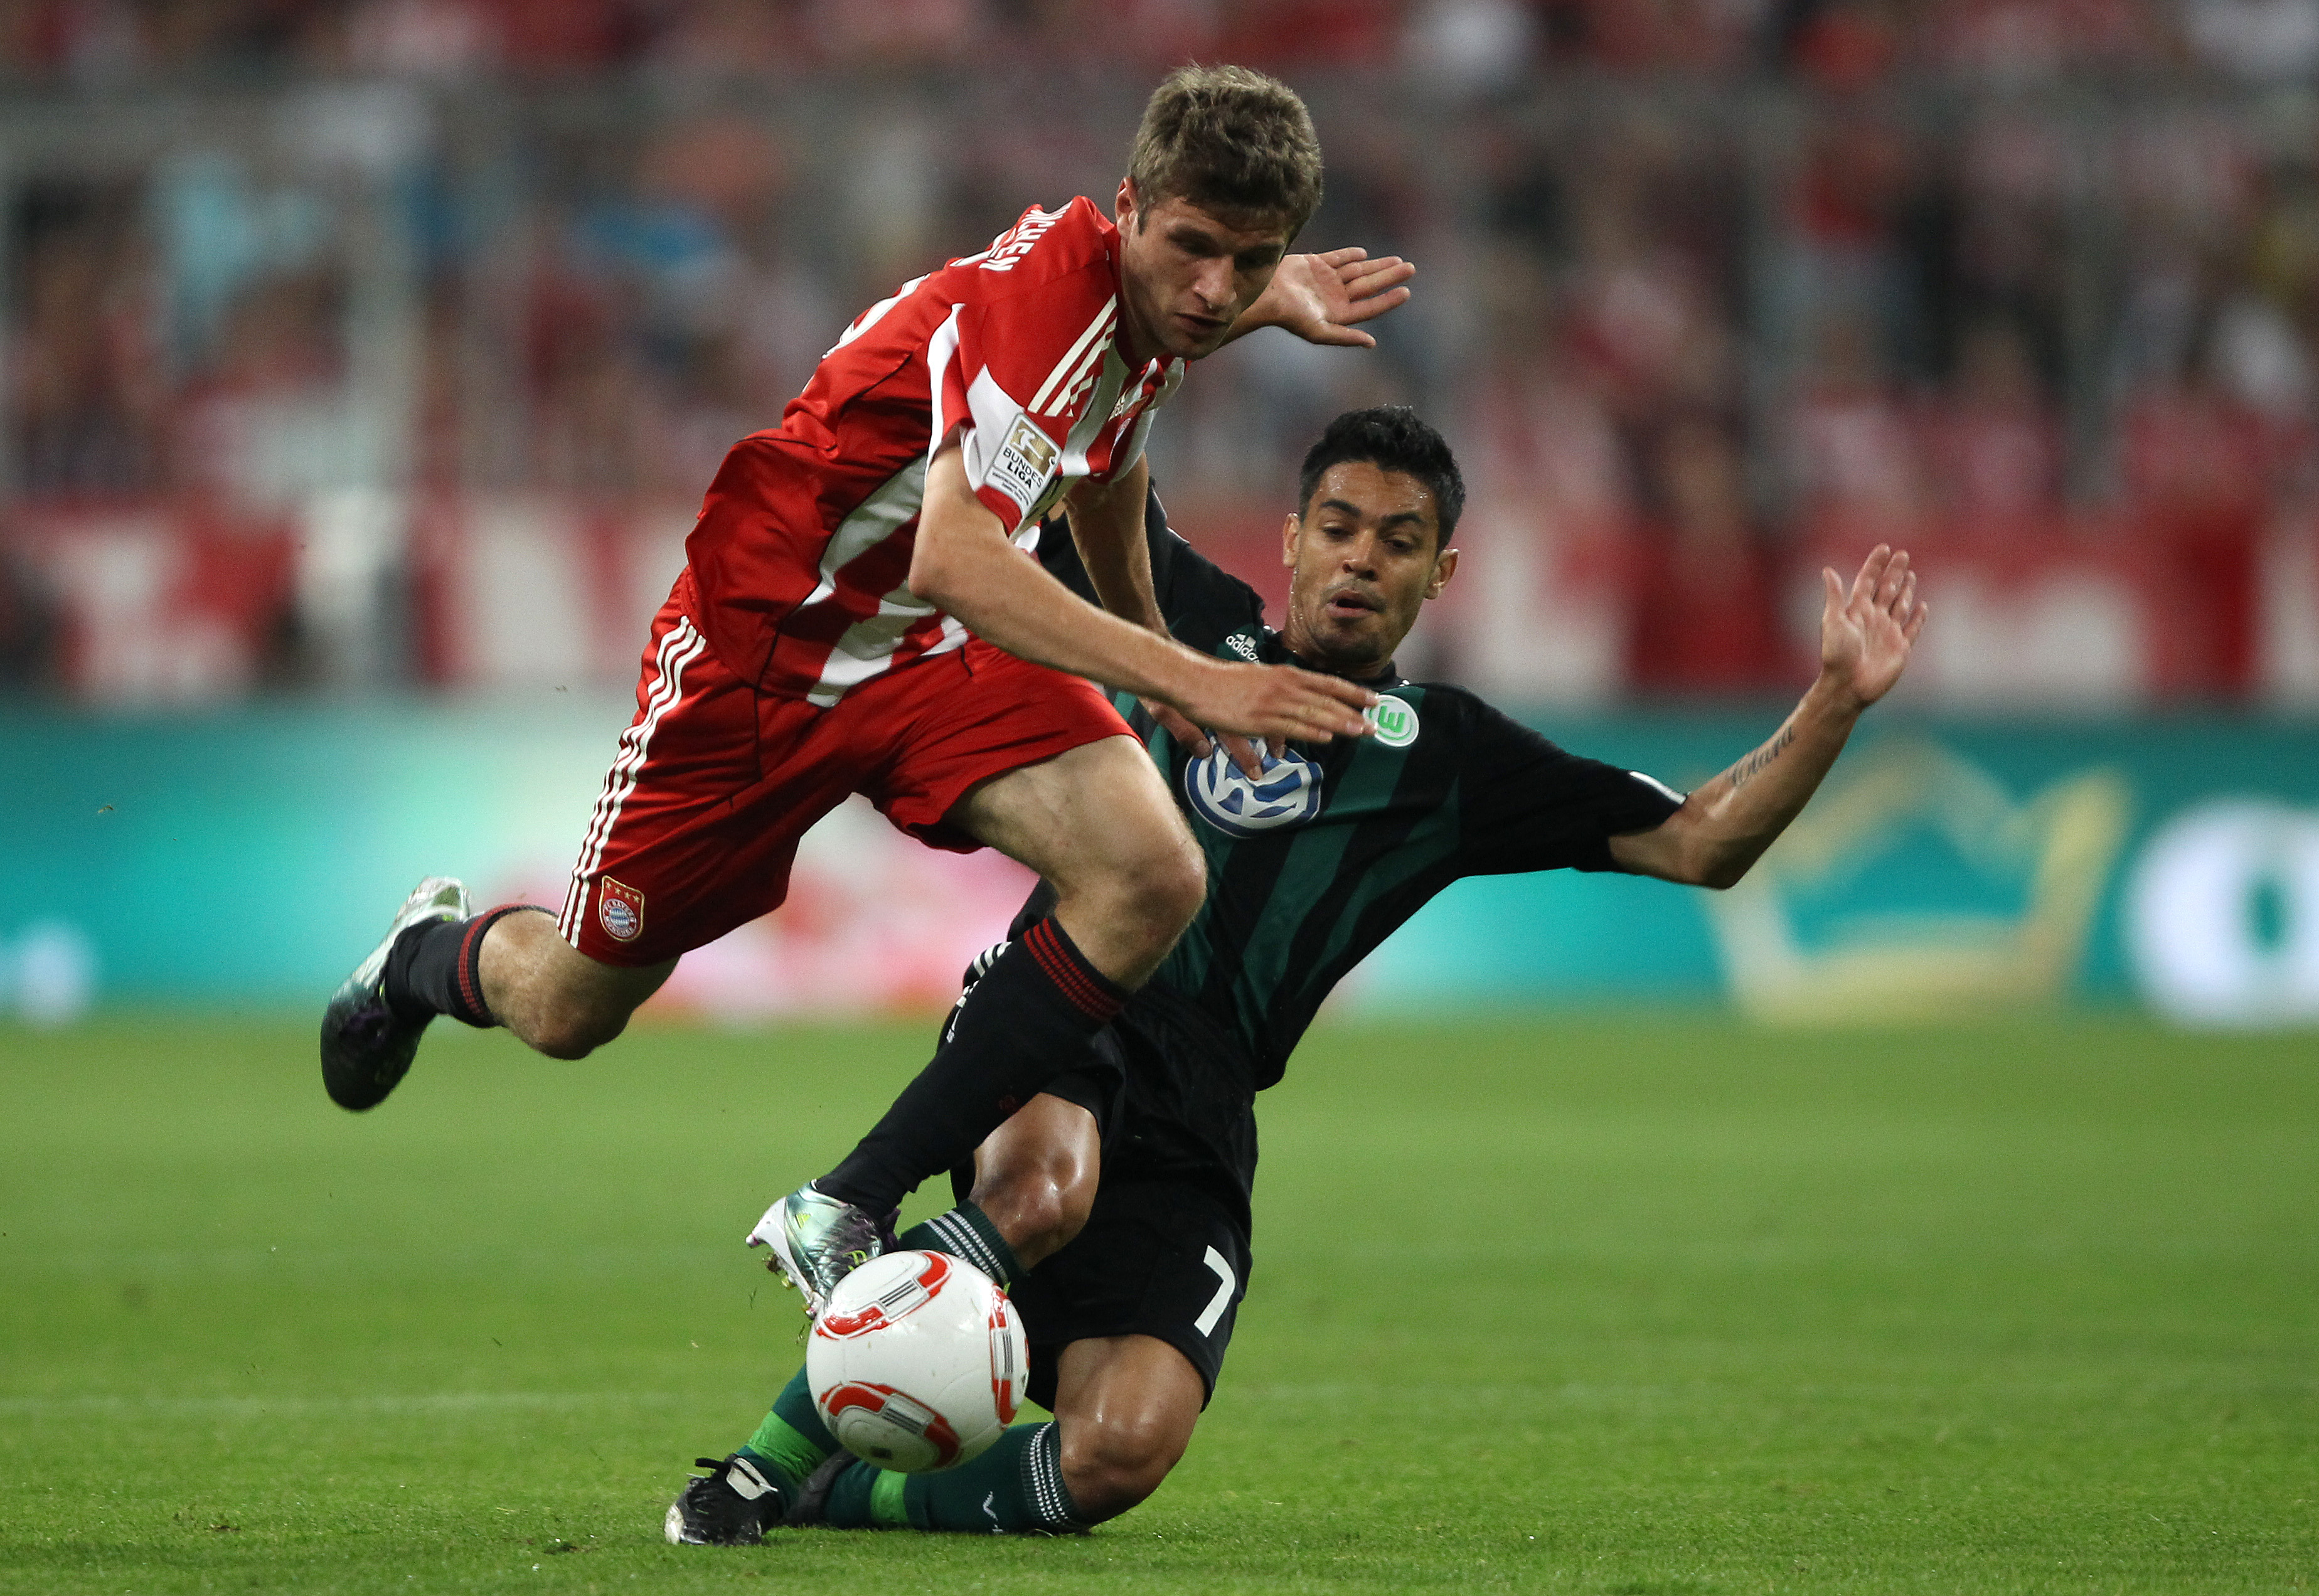 MUNICH, GERMANY - AUGUST 20:  Thomas Mueller of Bayern is tackled by Josue of Wolfsburg during the Bundesliga match between FC Bayern Muenchen and VfL Wolfsburg at Allianz Arena on August 20, 2010 in Munich, Germany.  (Photo by Clive Brunskill/Getty Image